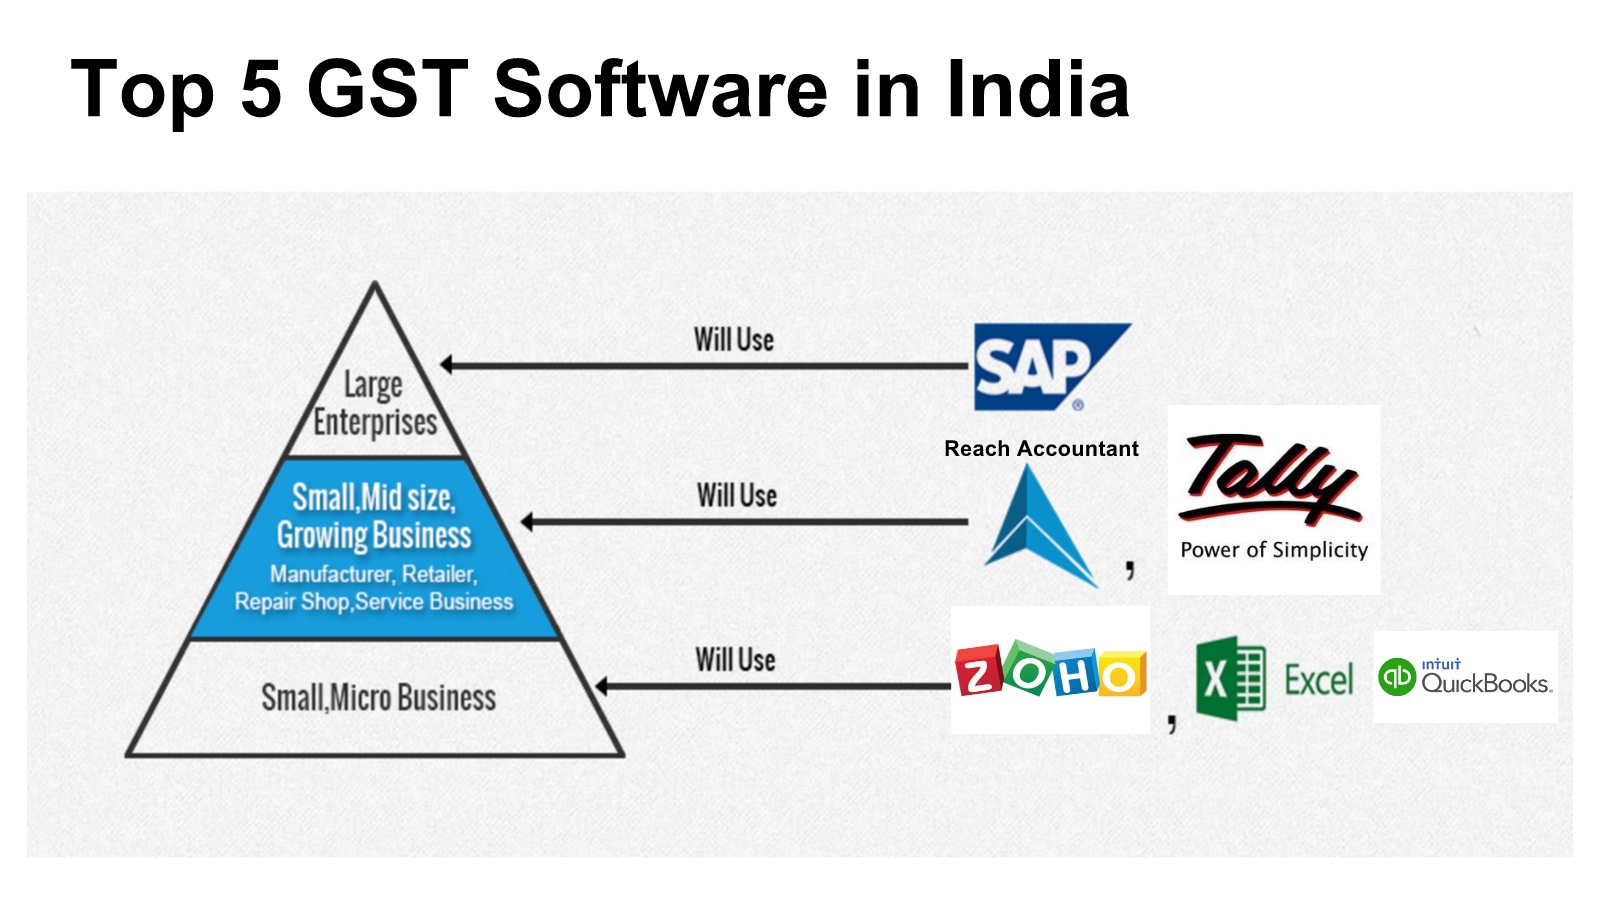 COMPARISON BETWEEN REACH GST AND TALLY GST SOFTWARE